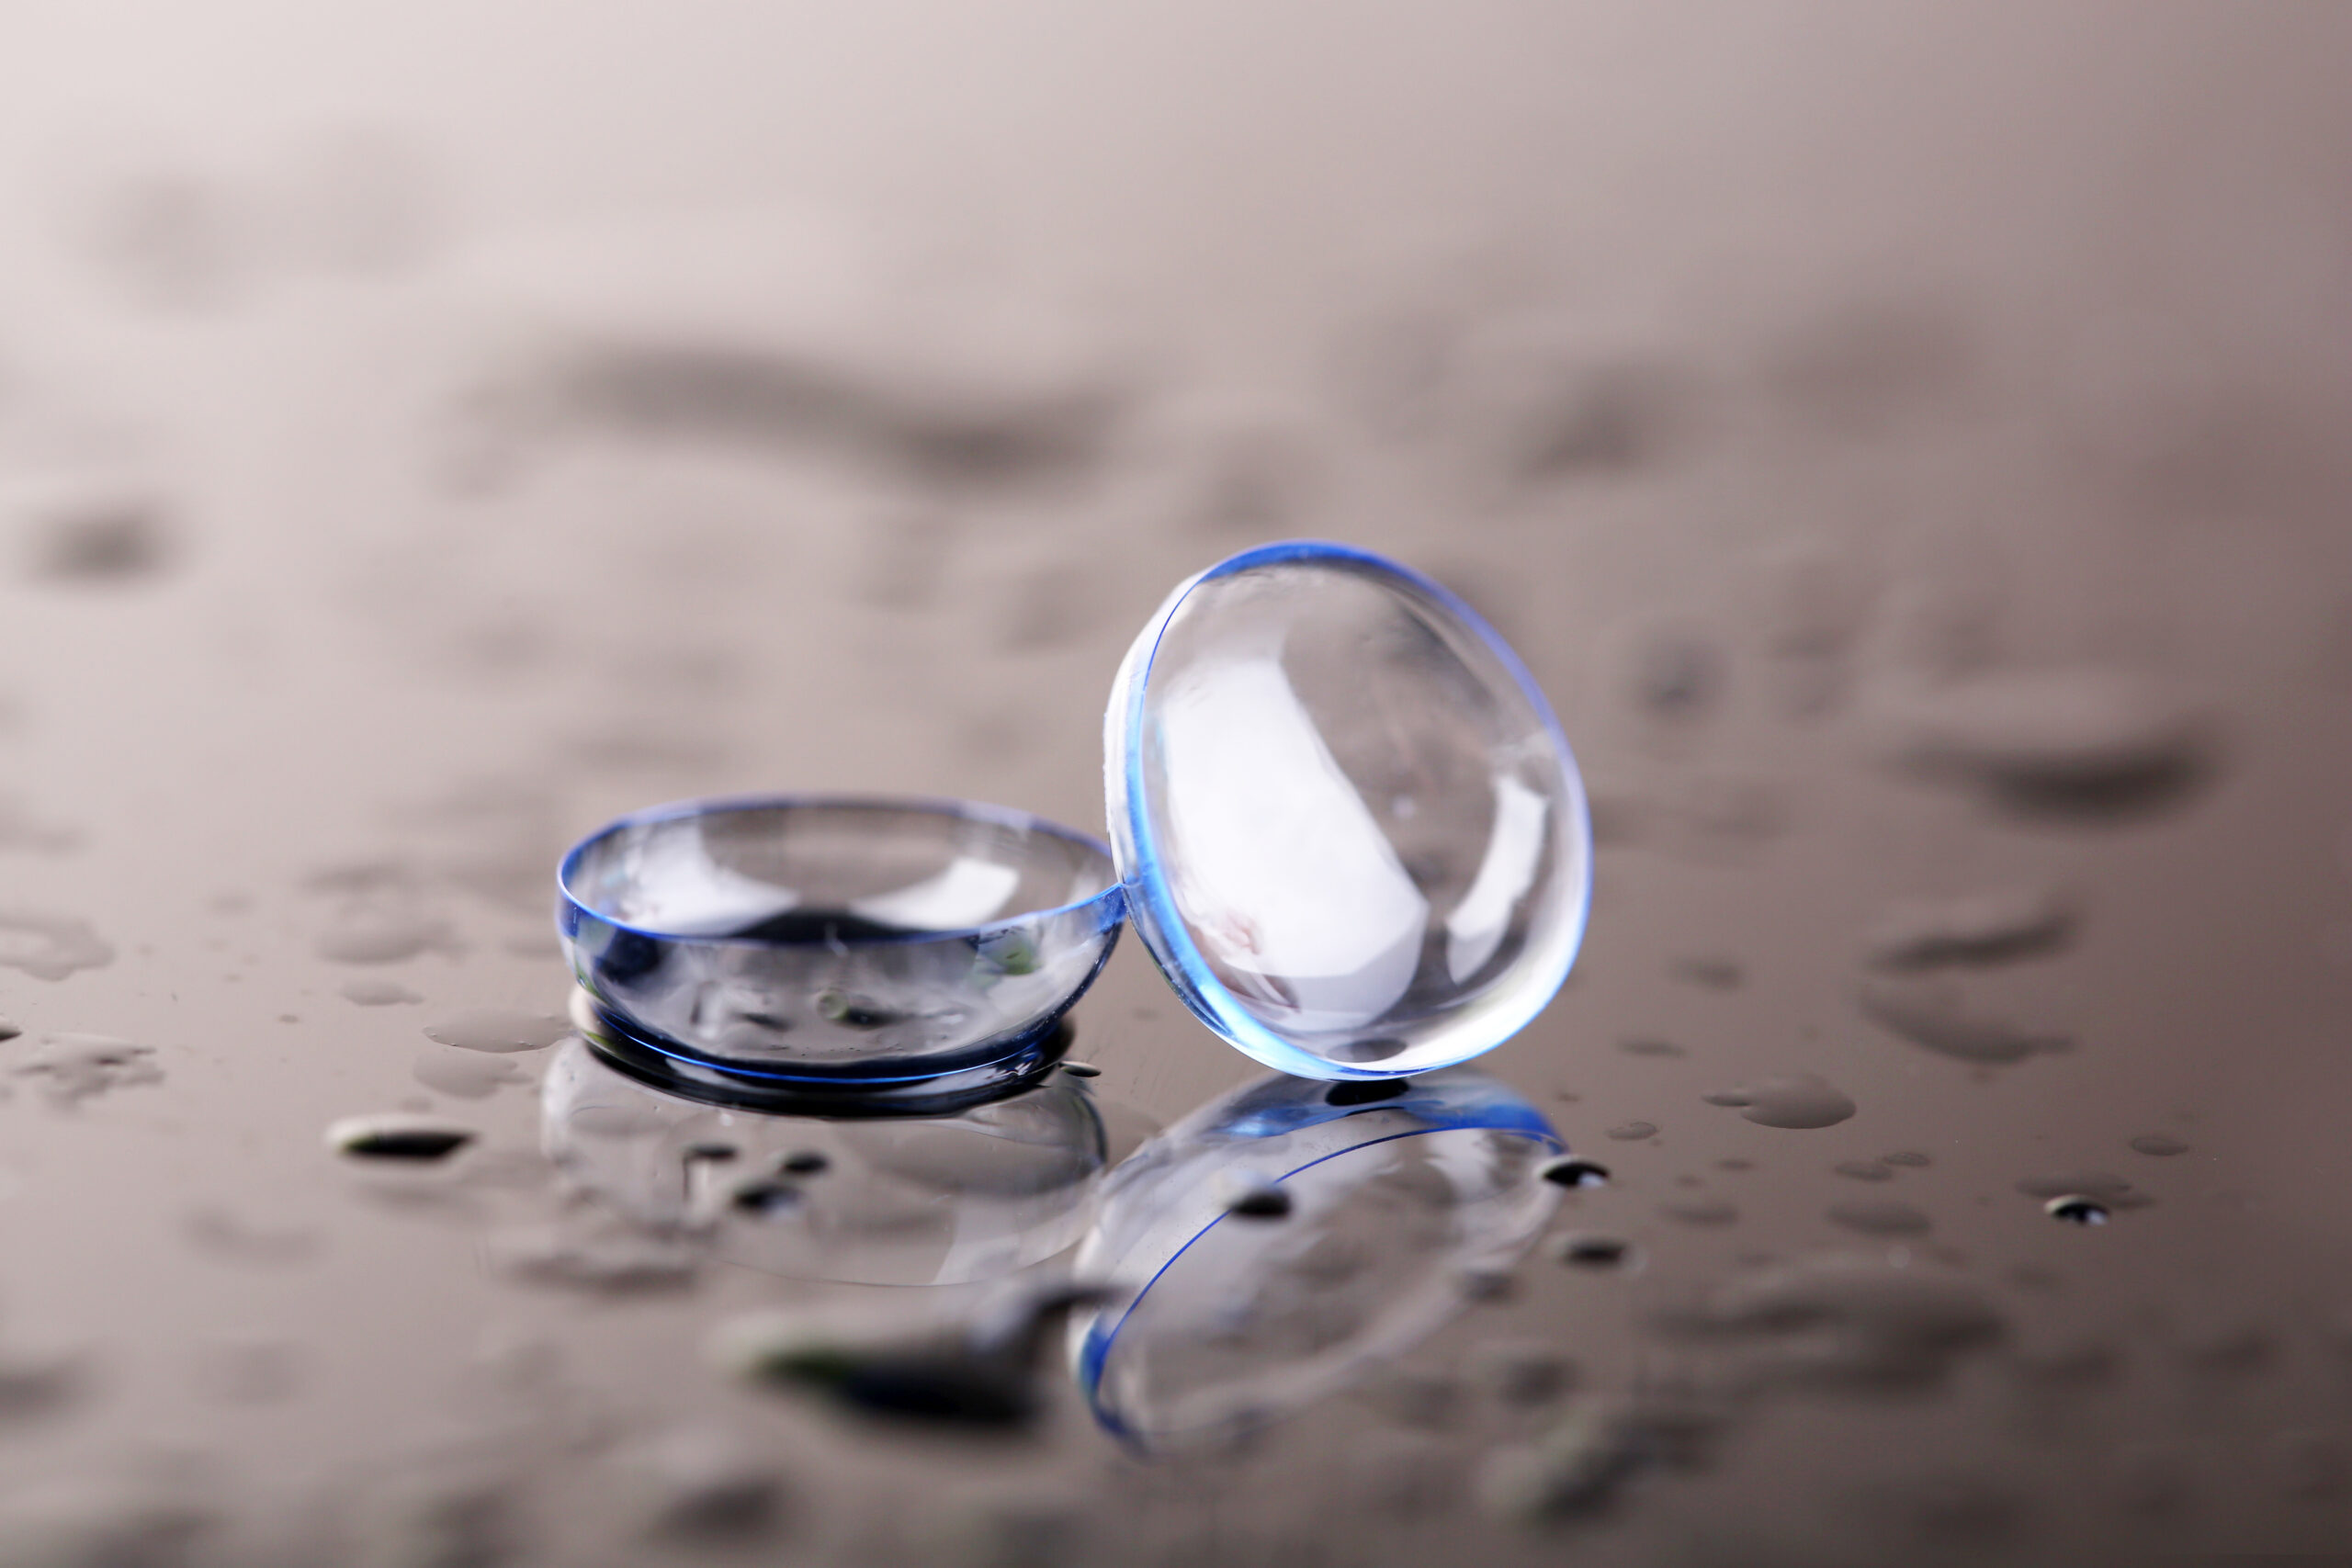 Smart Contact Lens Could Enable Wireless Glaucoma Detection